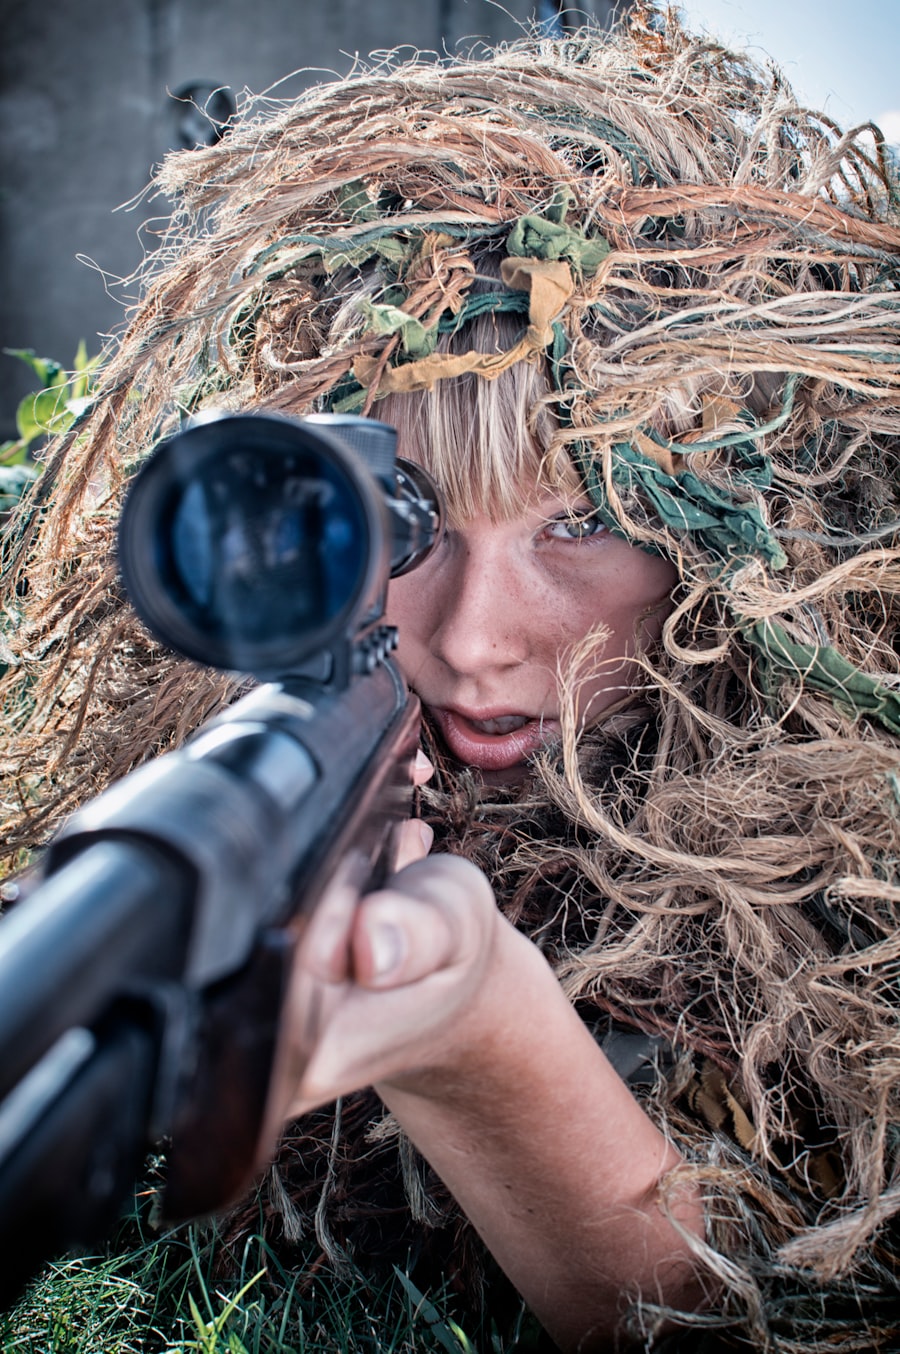 A woman in camouflage points a sniper rifle at a location off-camera.